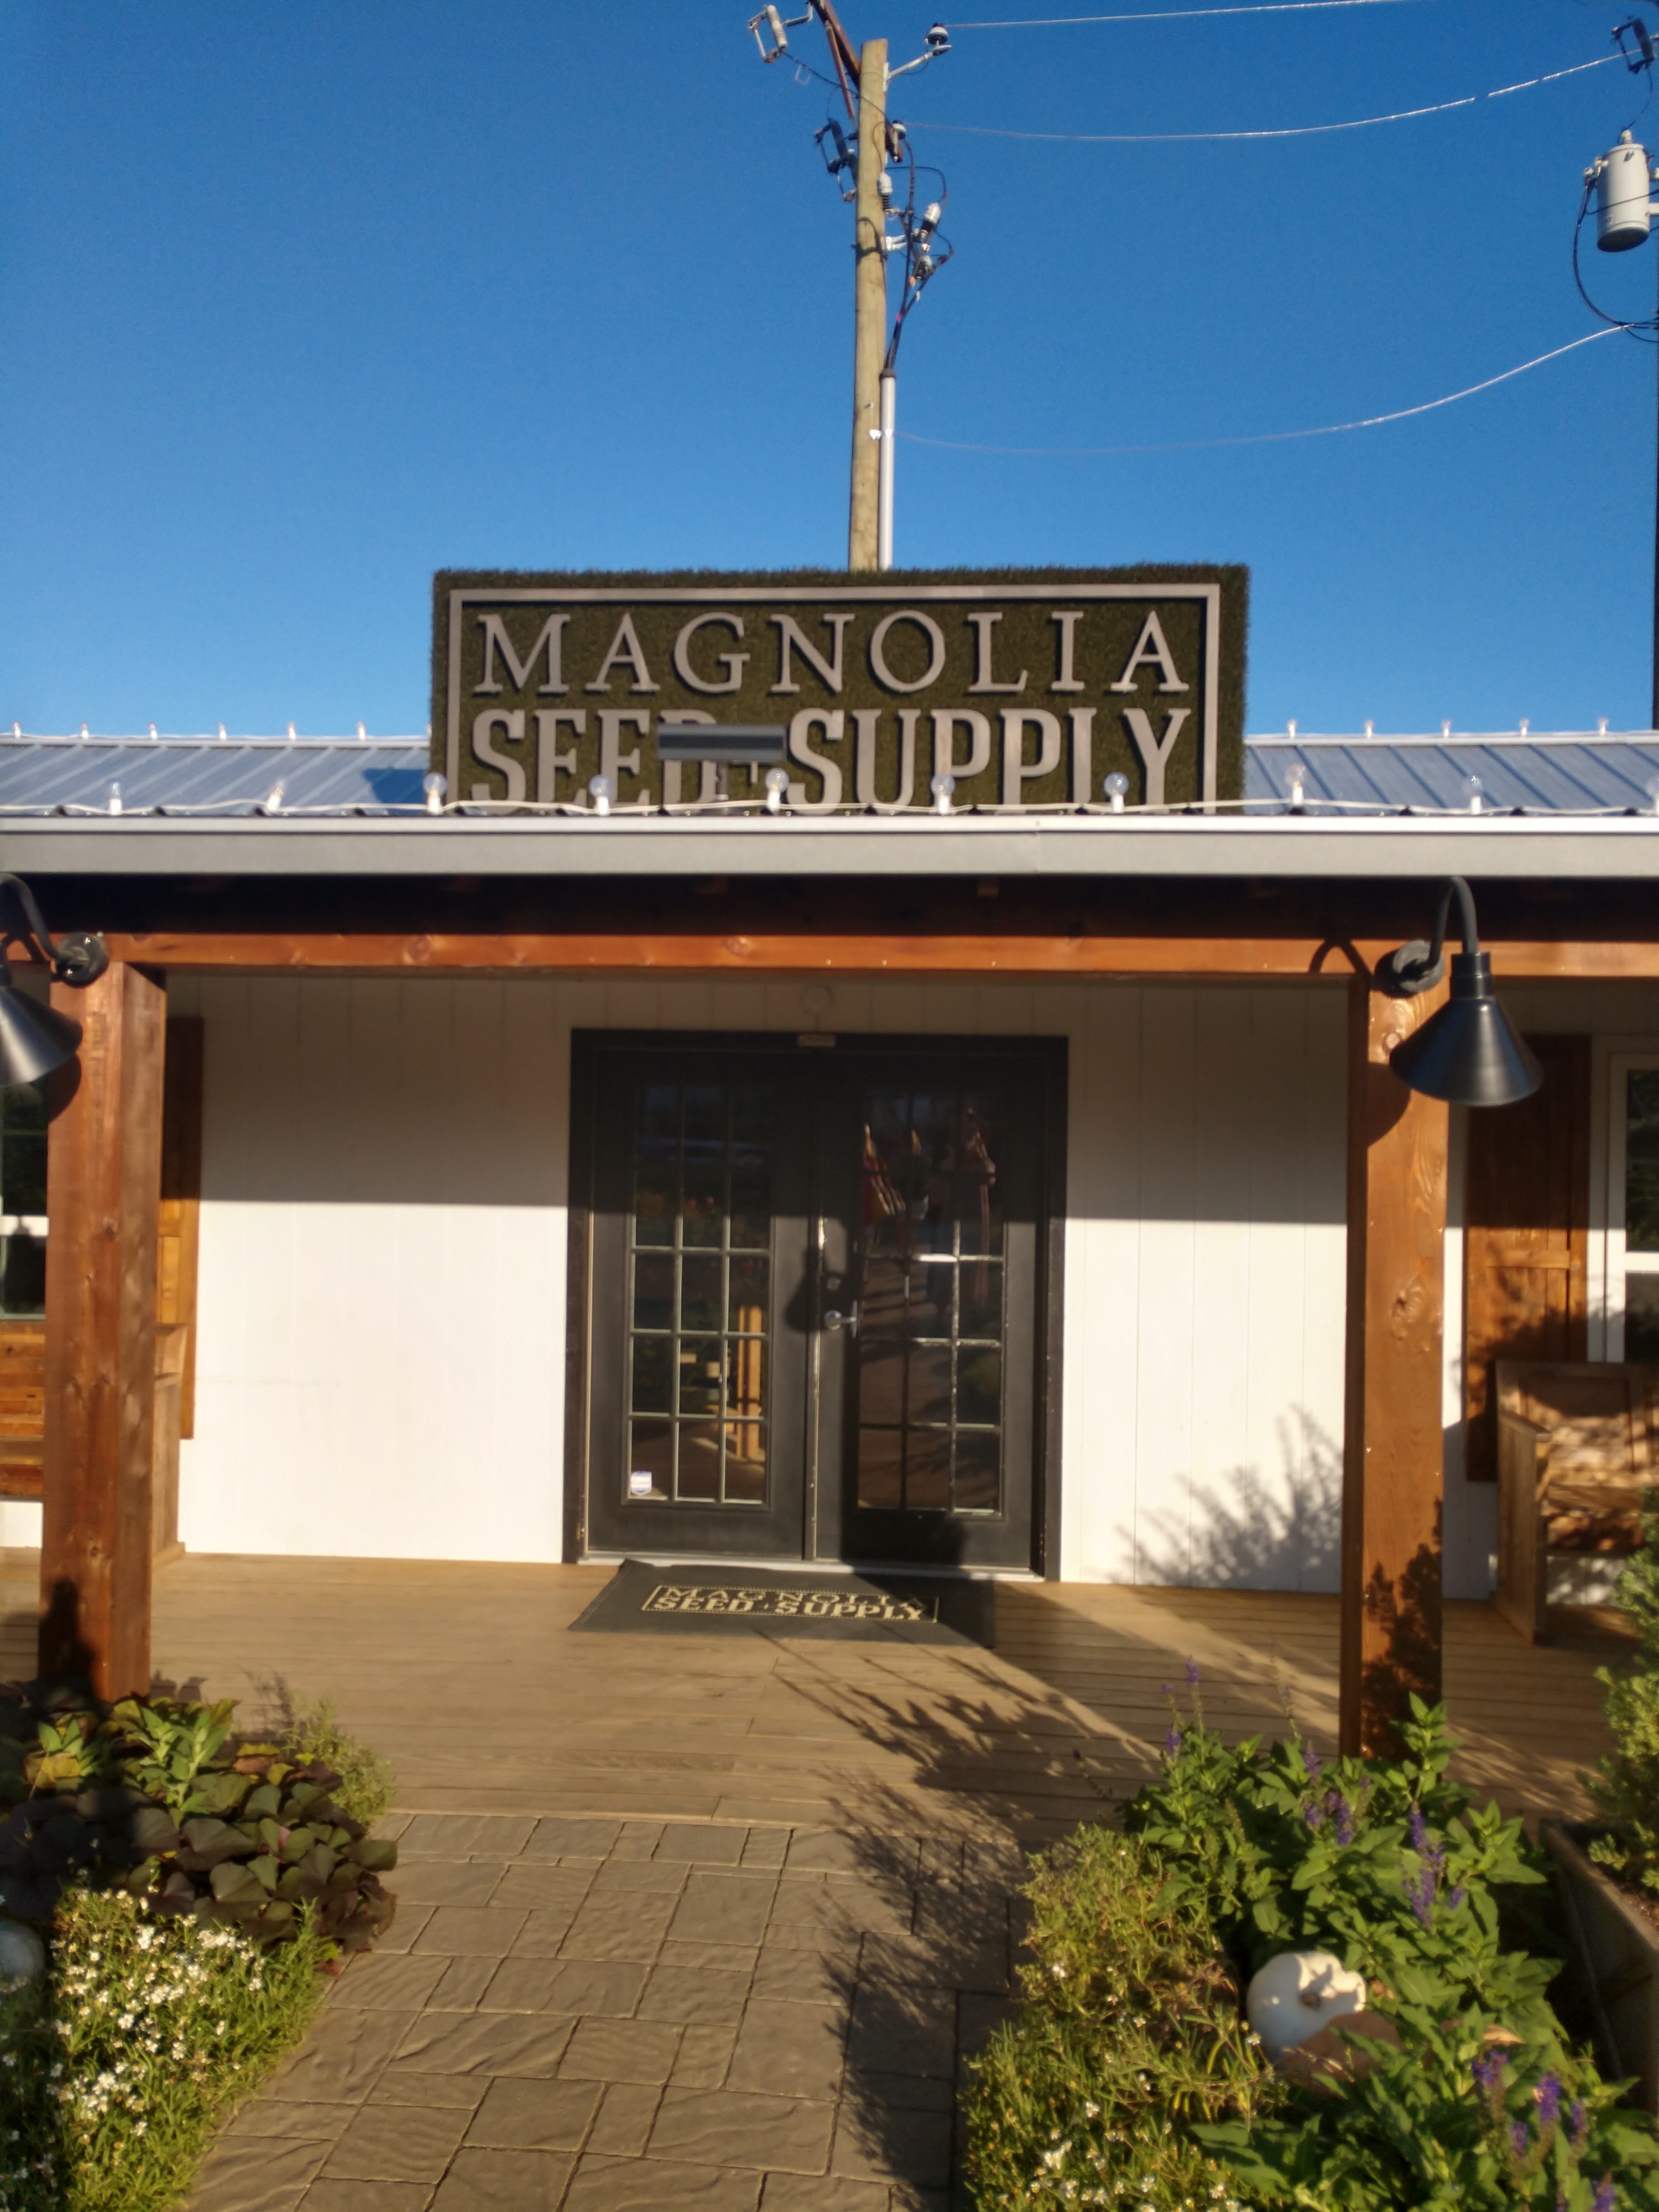 Magnolia Market Travel Guide - Dwell 605 - Midwest In Style